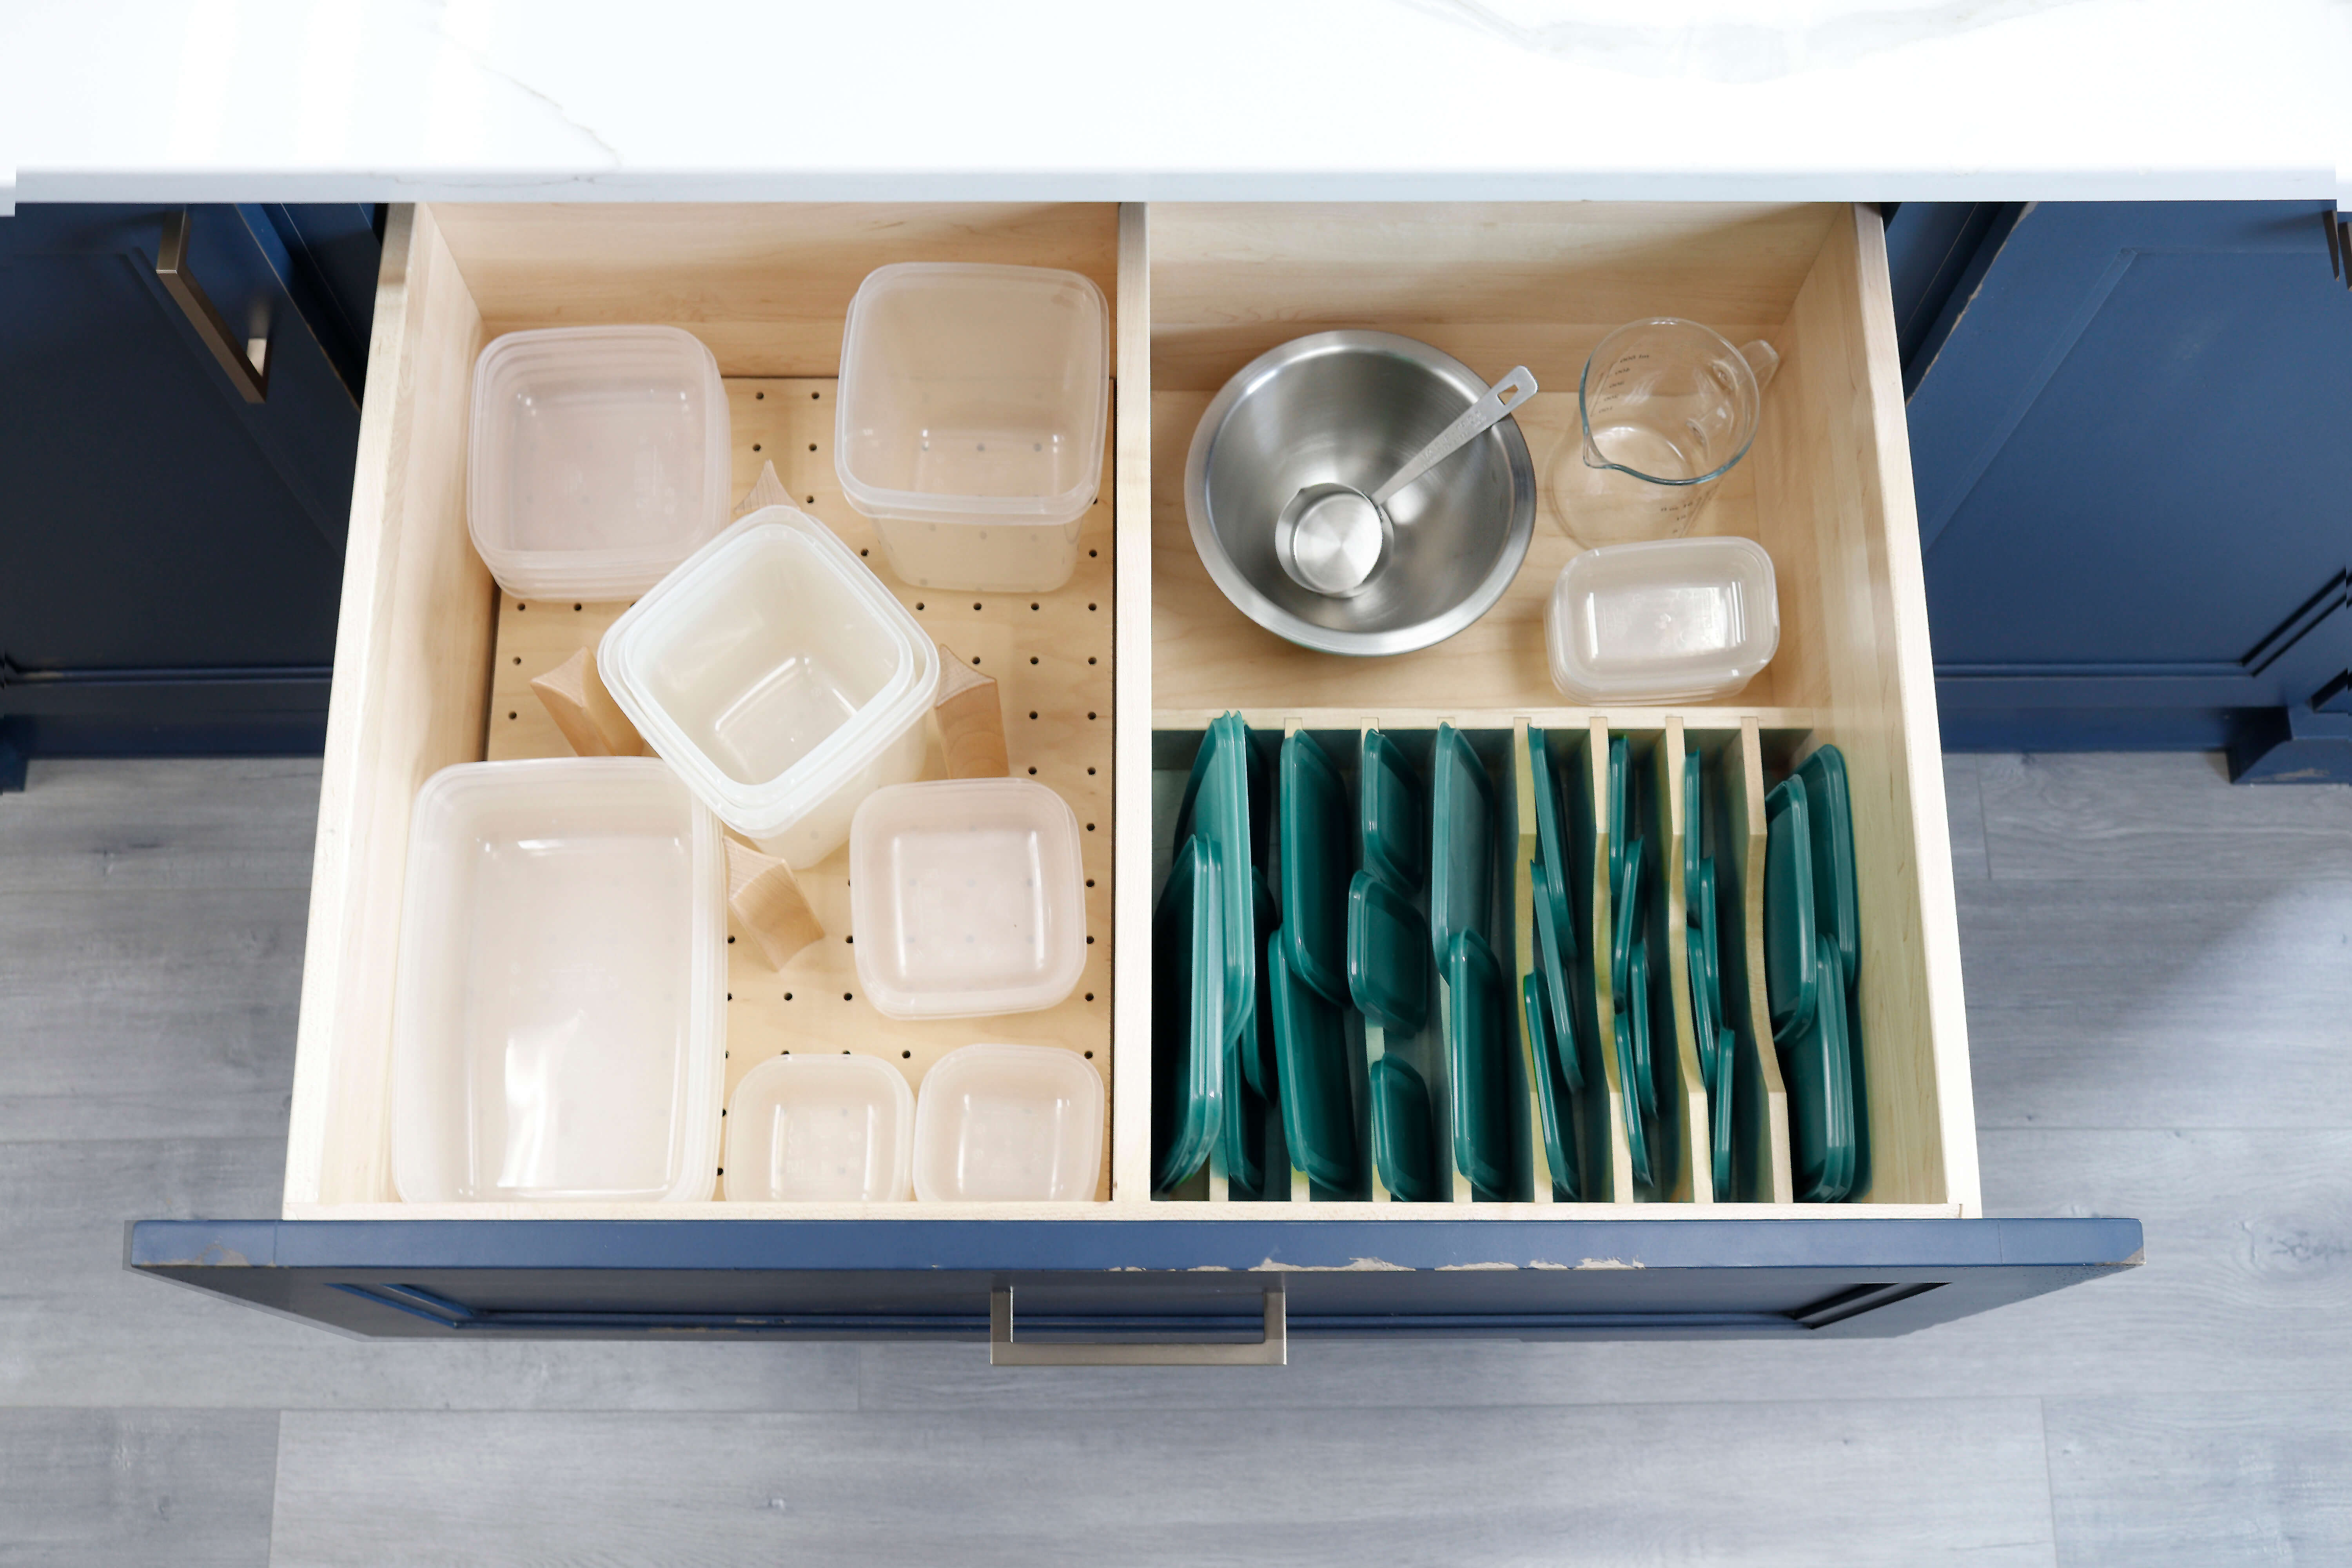 A dish rack drawer used for organizing food containers and lids.